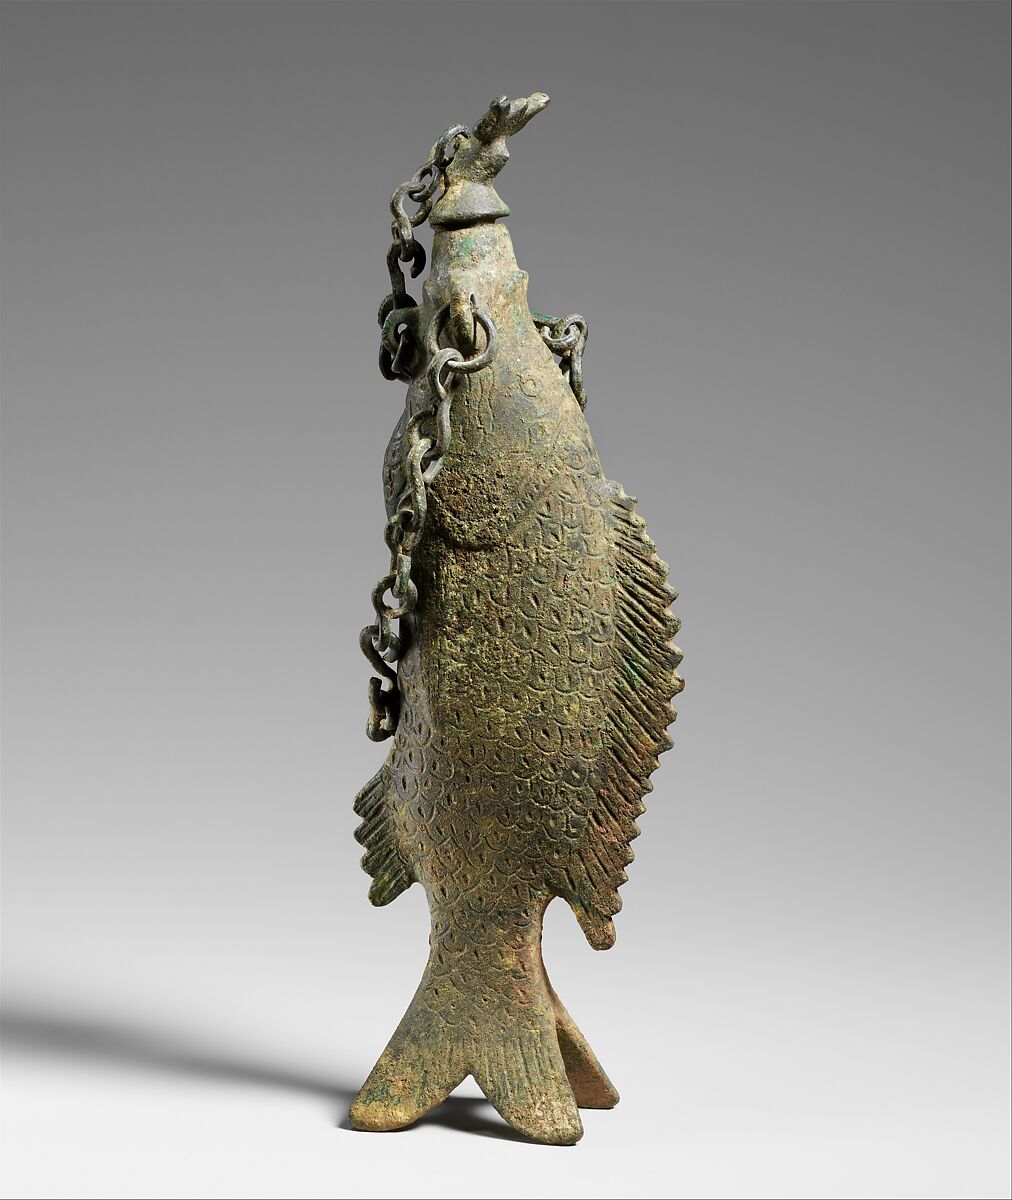 Vessel in the Shape of a Fish, Copper alloy, cast, Roman or Byzantine 